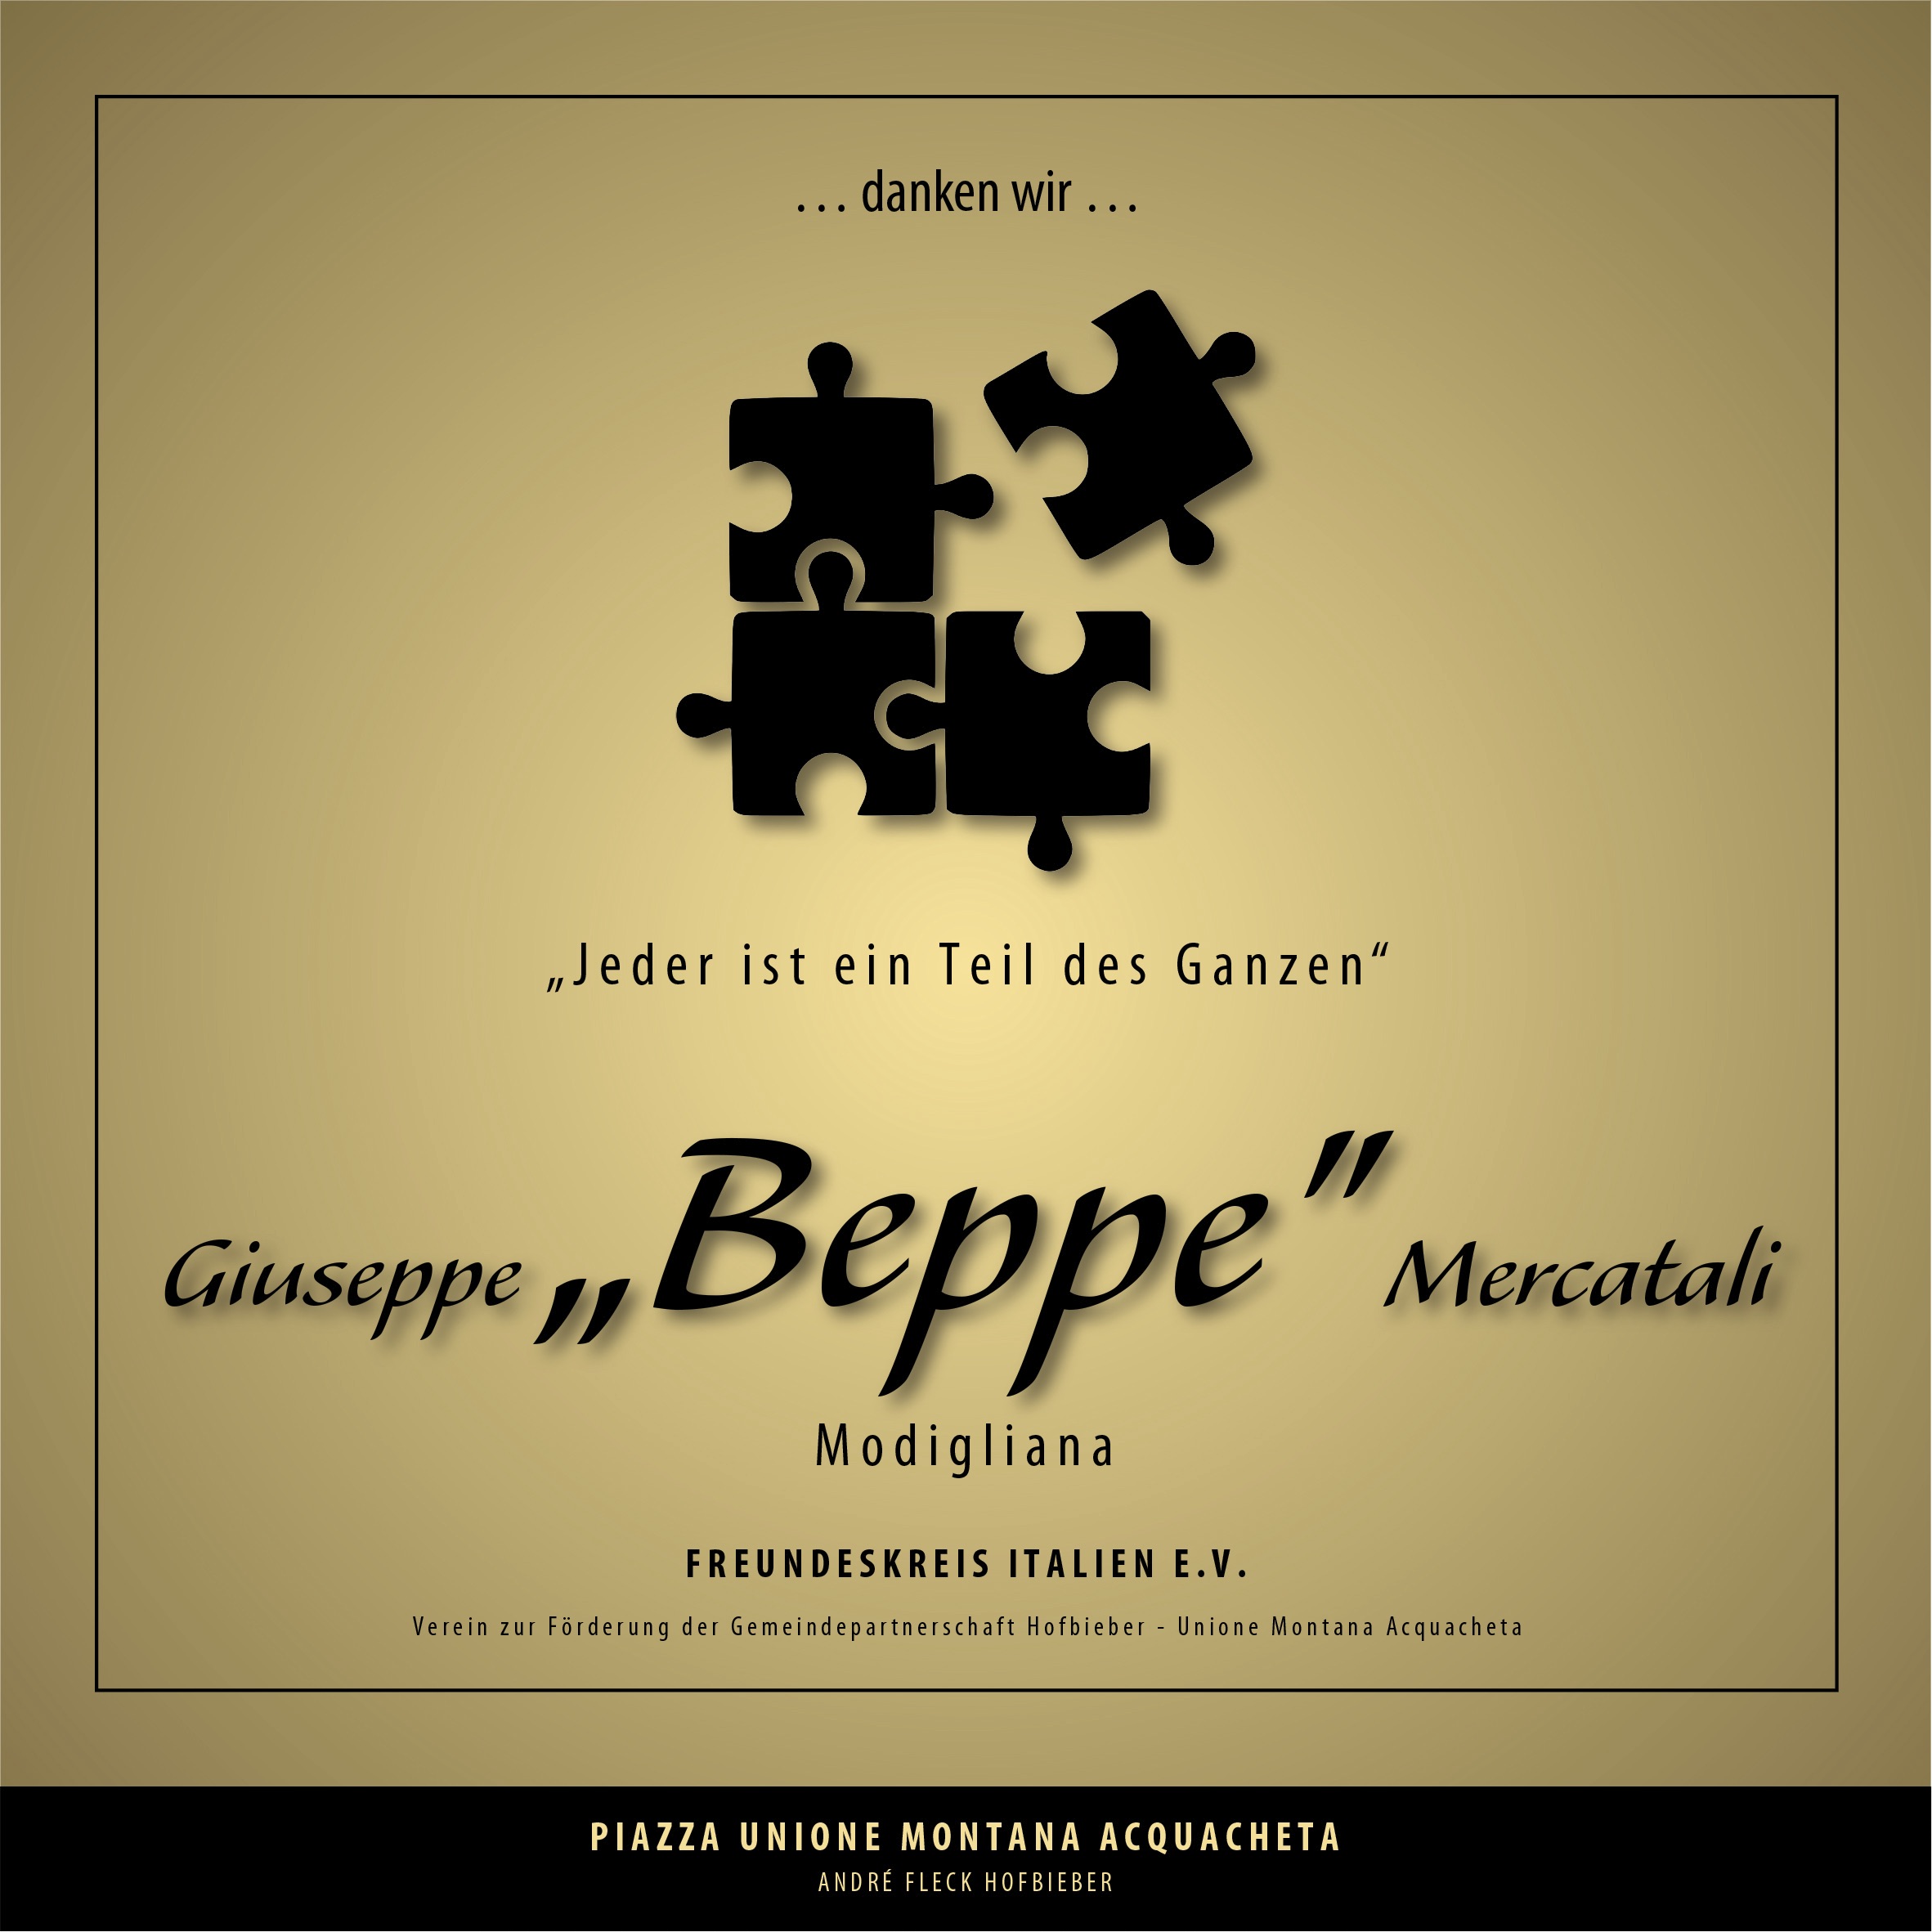 200 x 200 Beppe